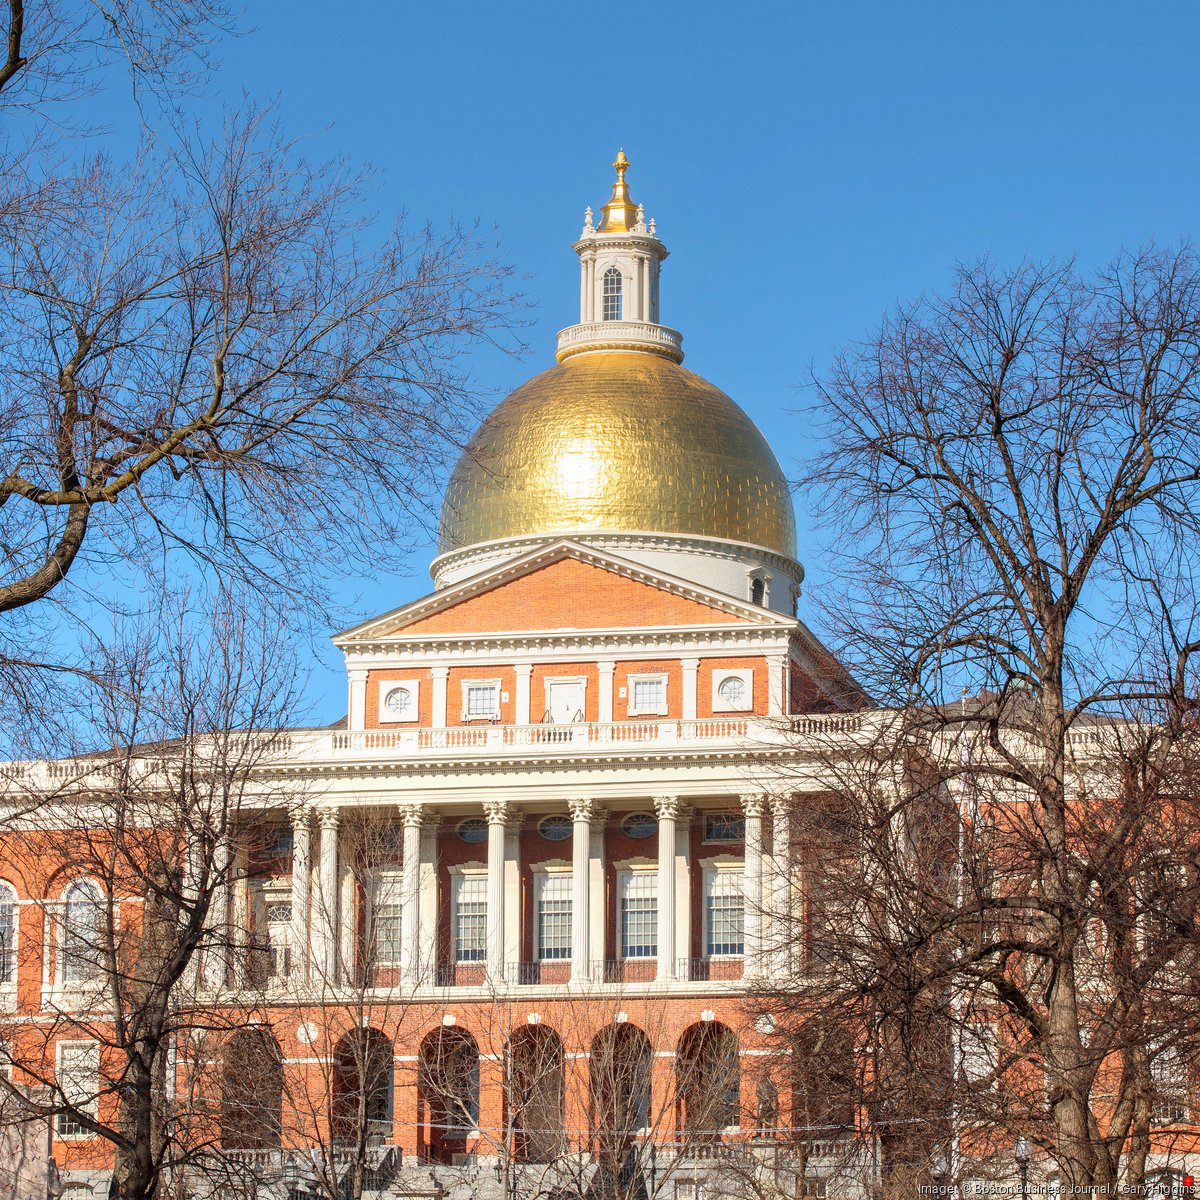 Mass. lawmakers to vote on bill providing driver's licenses to undocumented  